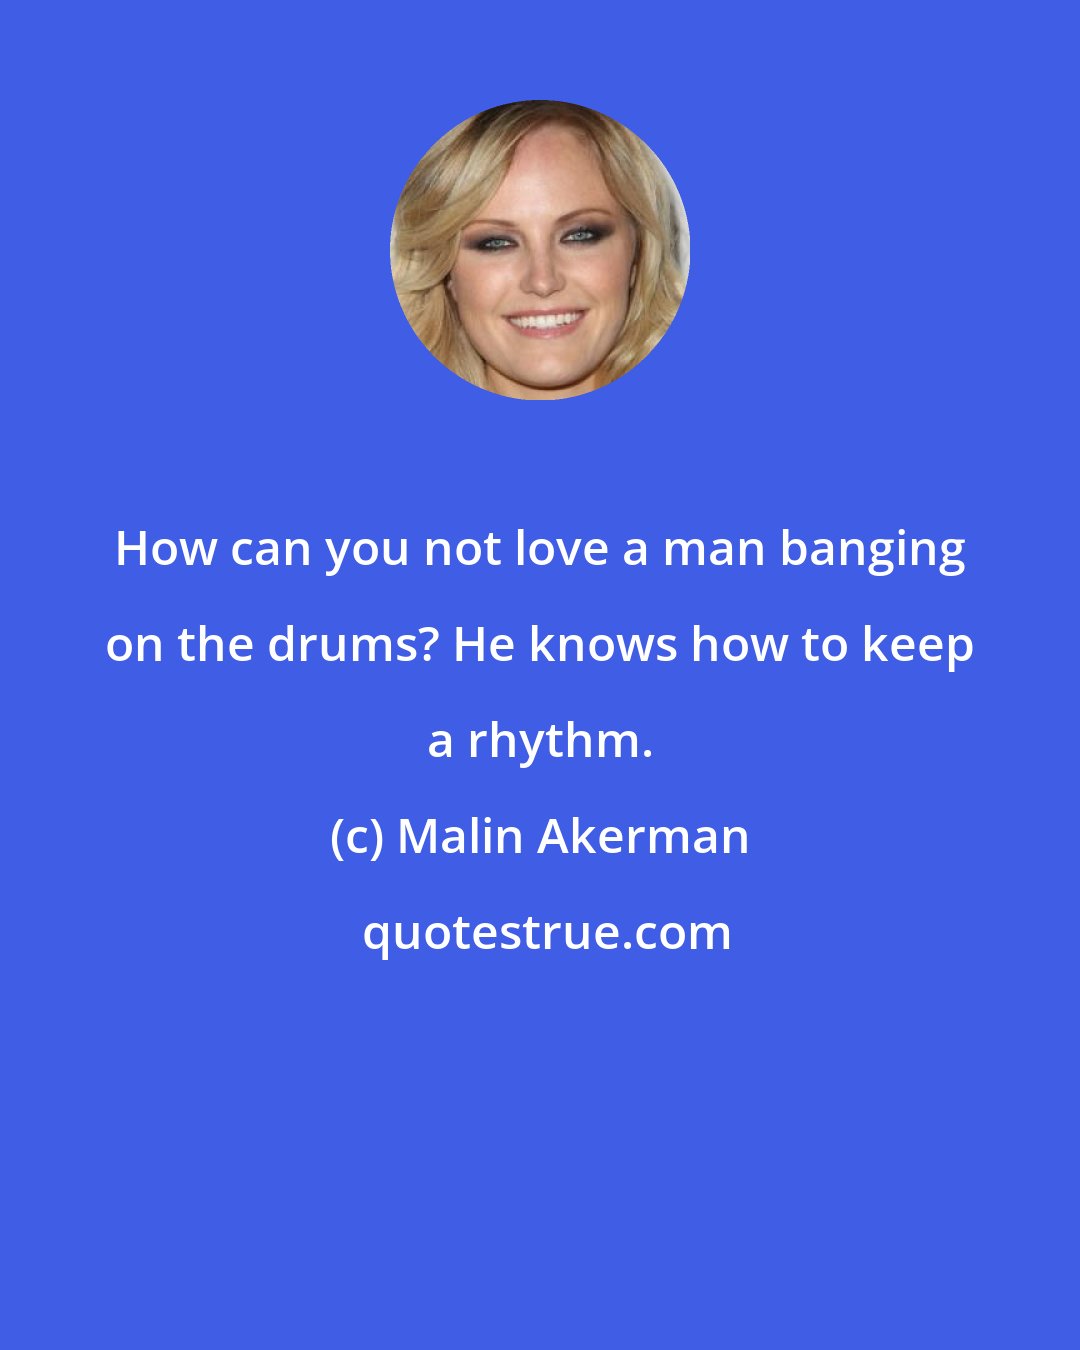 Malin Akerman: How can you not love a man banging on the drums? He knows how to keep a rhythm.